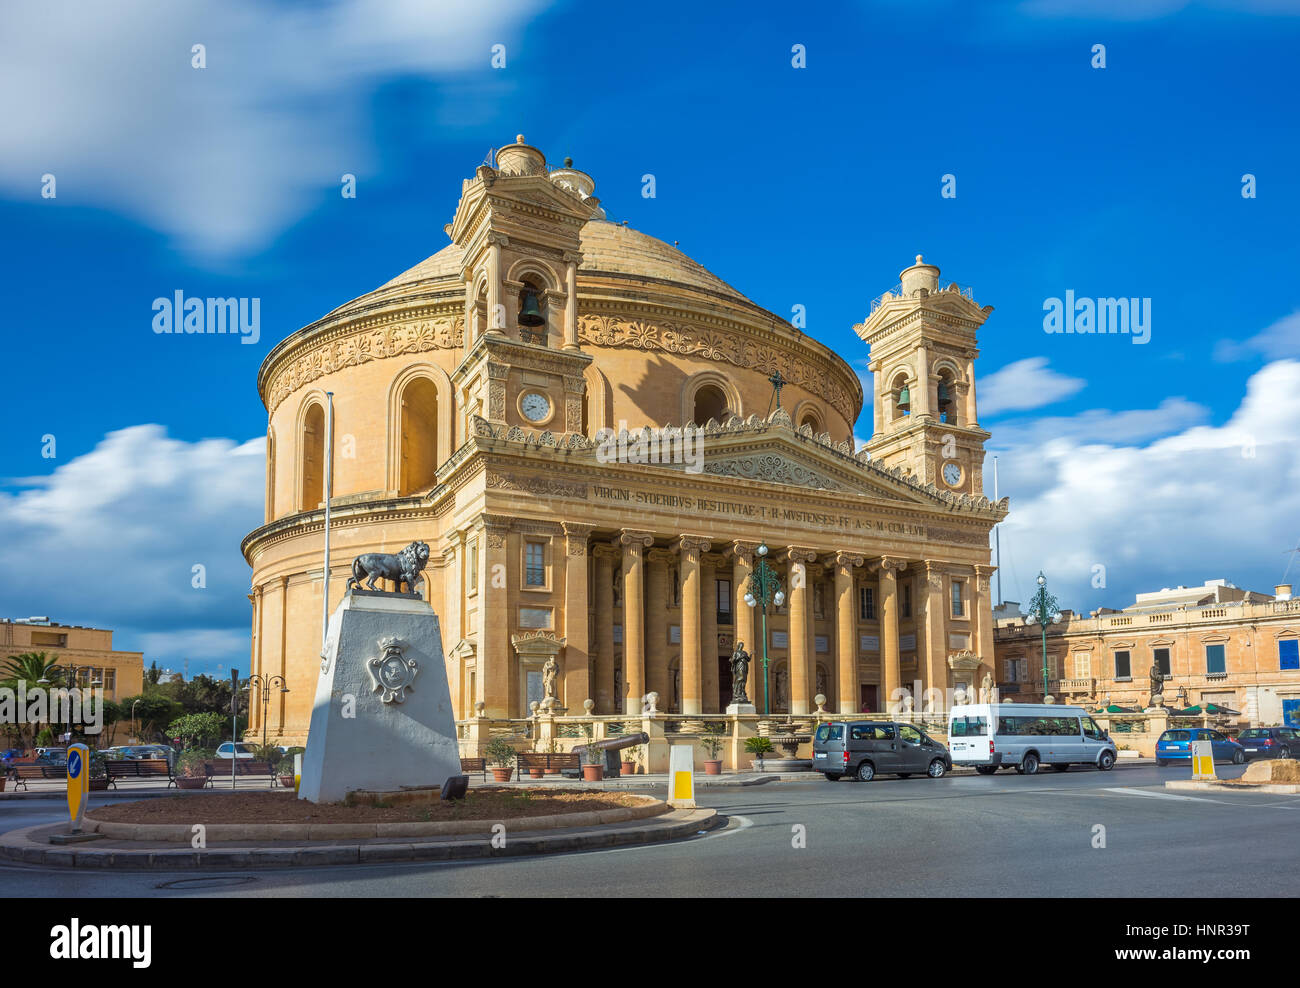 Mosta, Malta - The Church of the Assumption of Our Lady, commonly known as the Rotunda of Mosta or Mosta Dome at daylight with moving clouds and blue  Stock Photo